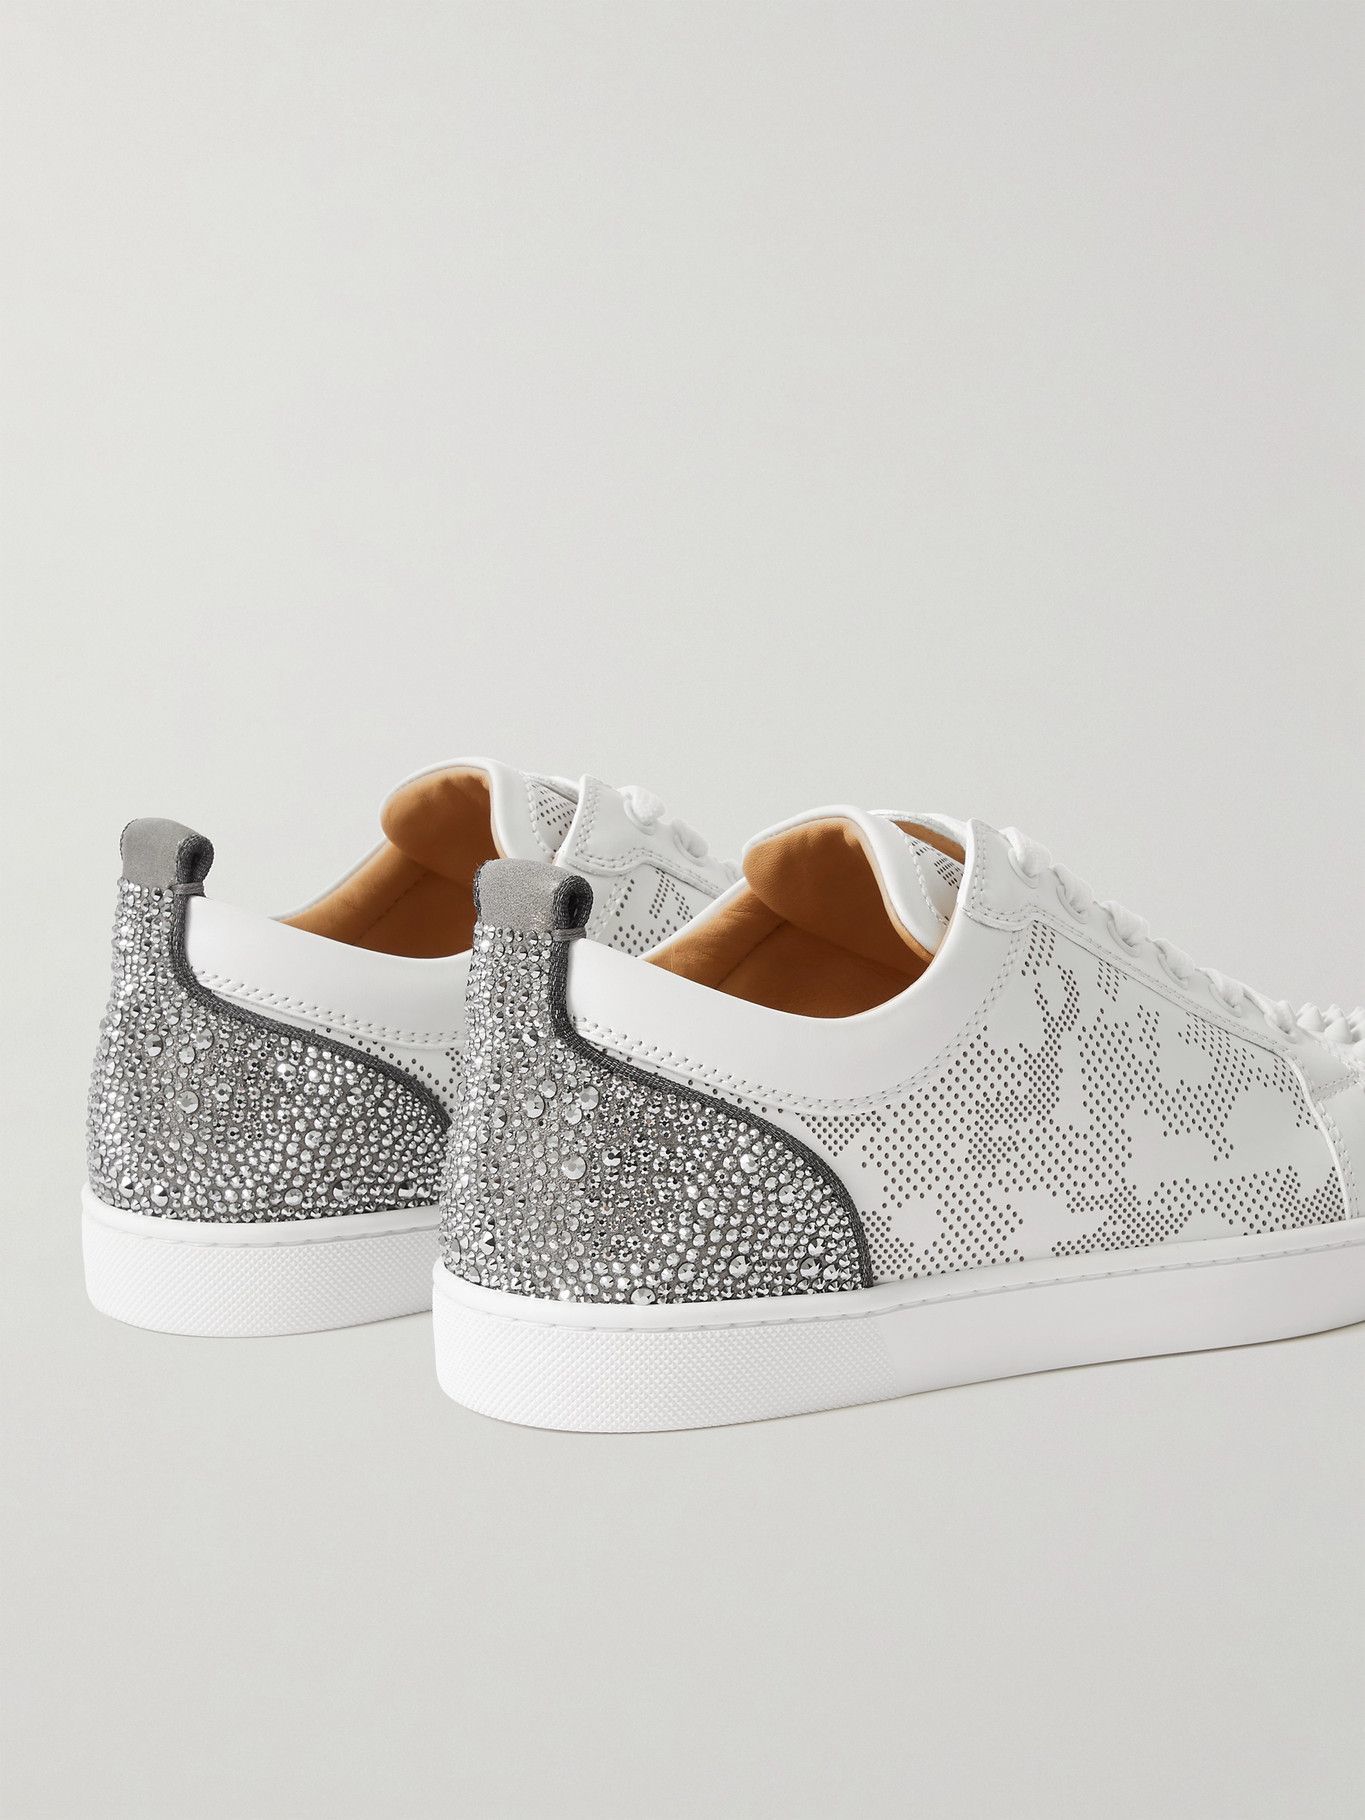 Christian Louboutin - Louis Junior Spikes Embellished Leather Sneakers - White Christian Louboutin